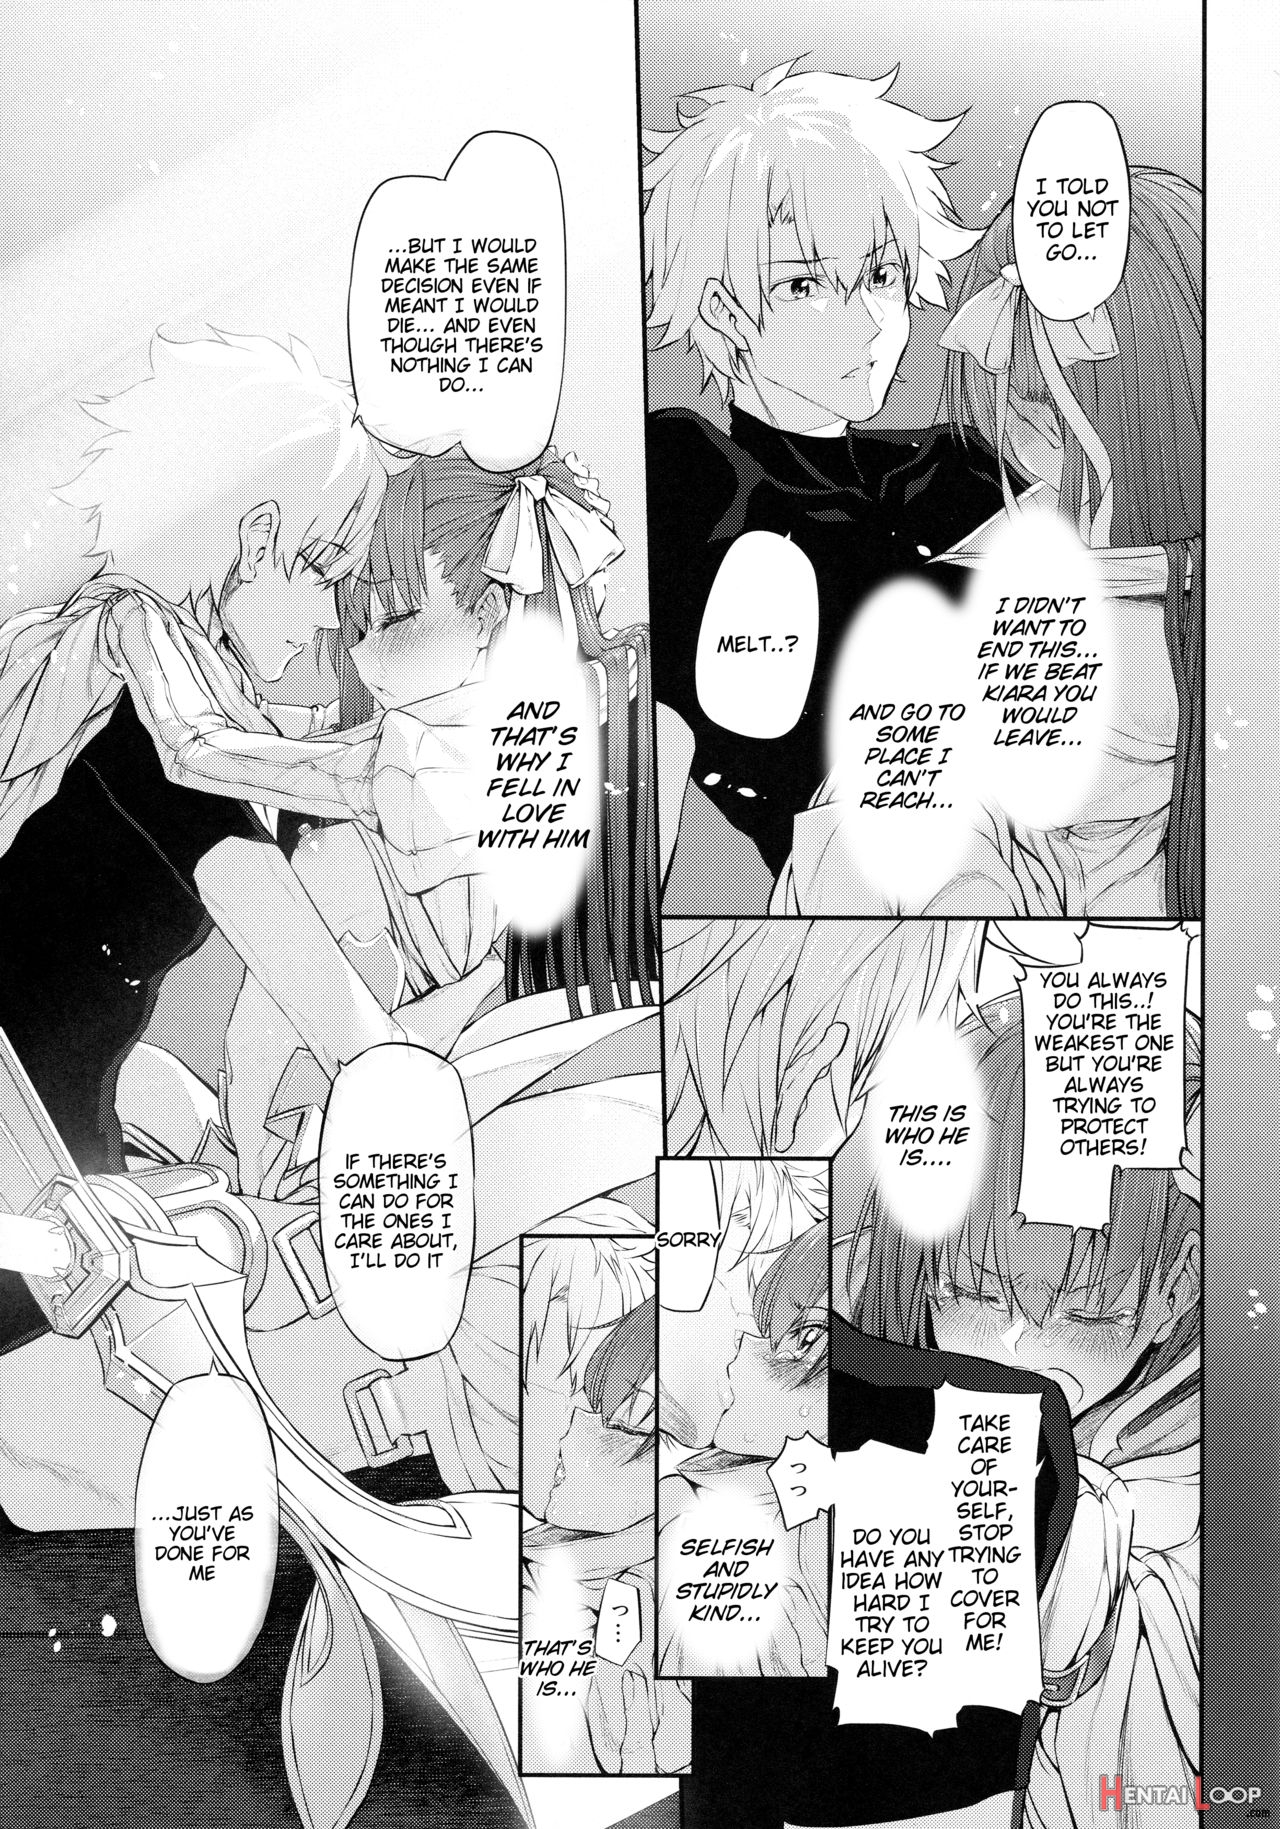 Marked Girls Vol. 15 page 23